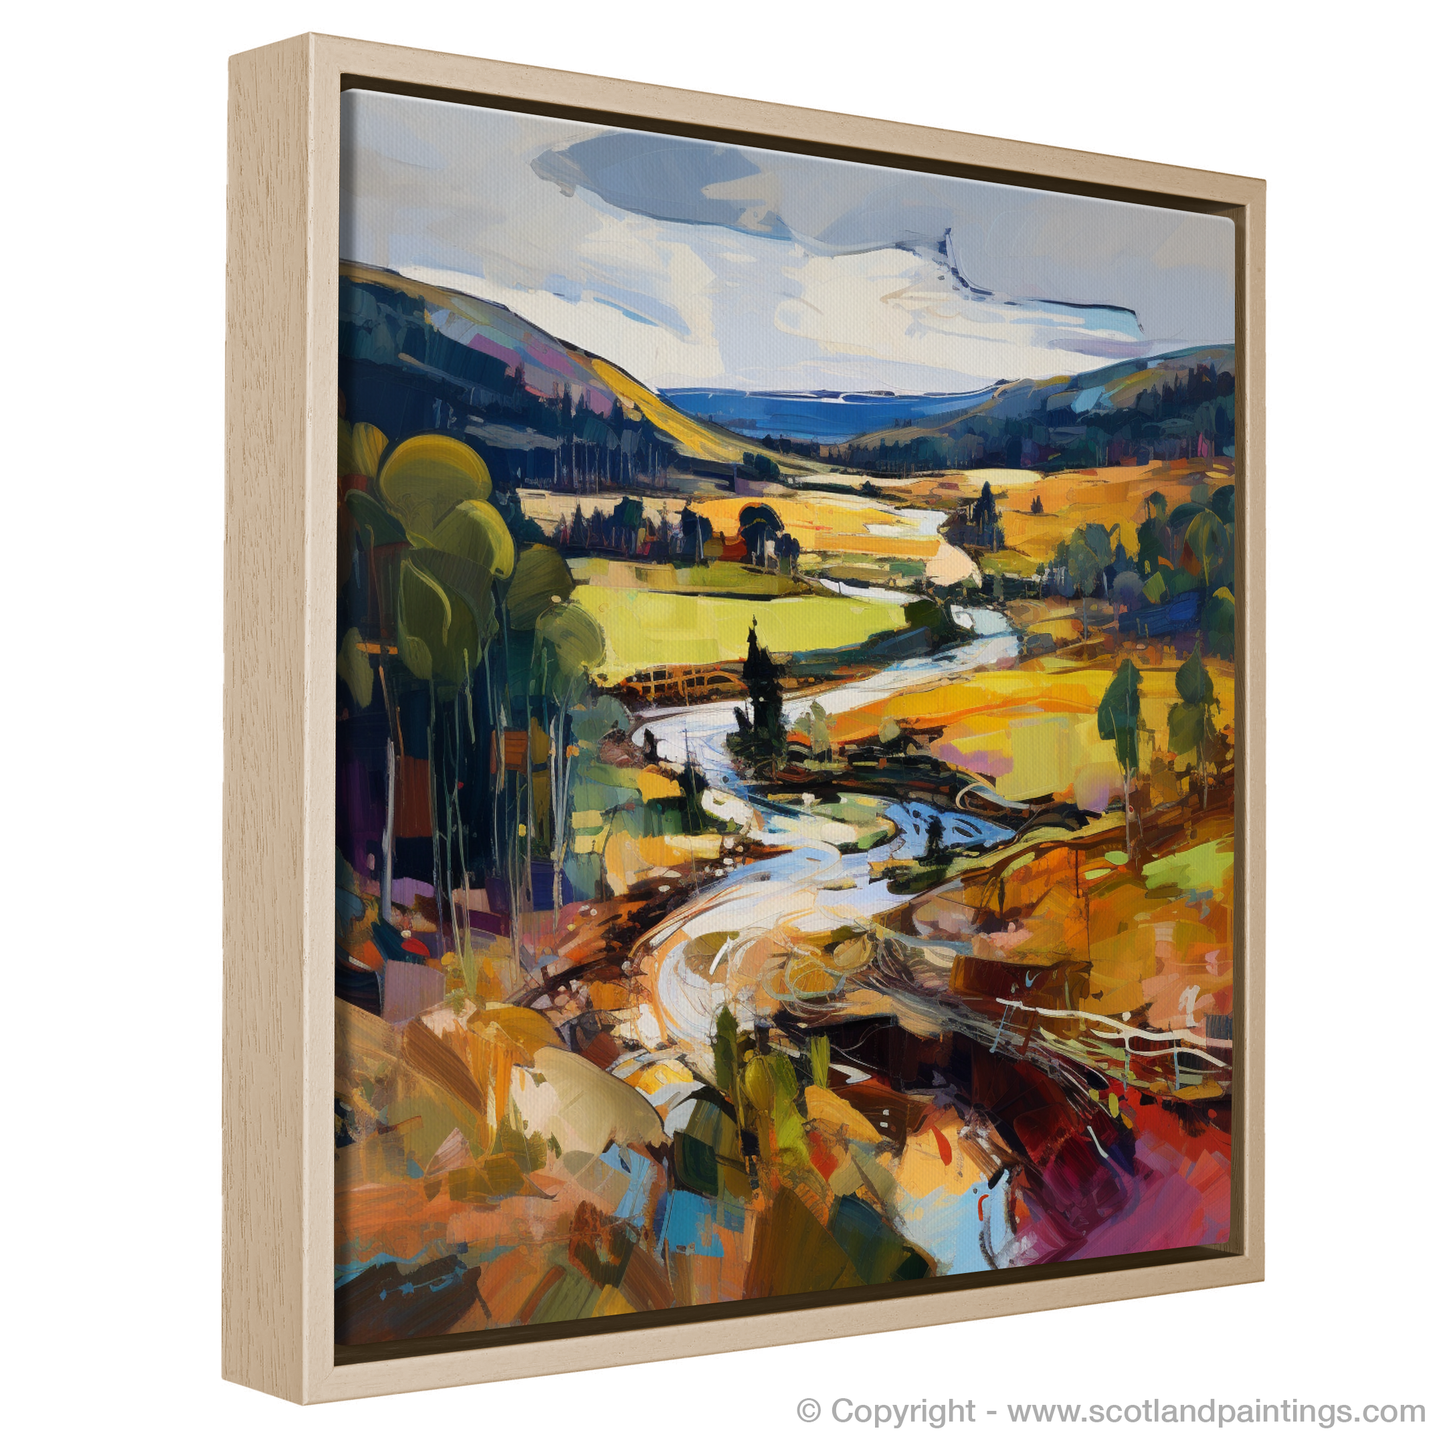 Painting and Art Print of Glen Tanar, Aberdeenshire entitled "Vibrant Energy of Glen Tanar: An Expressionist Ode to Scotland's Natural Splendour".